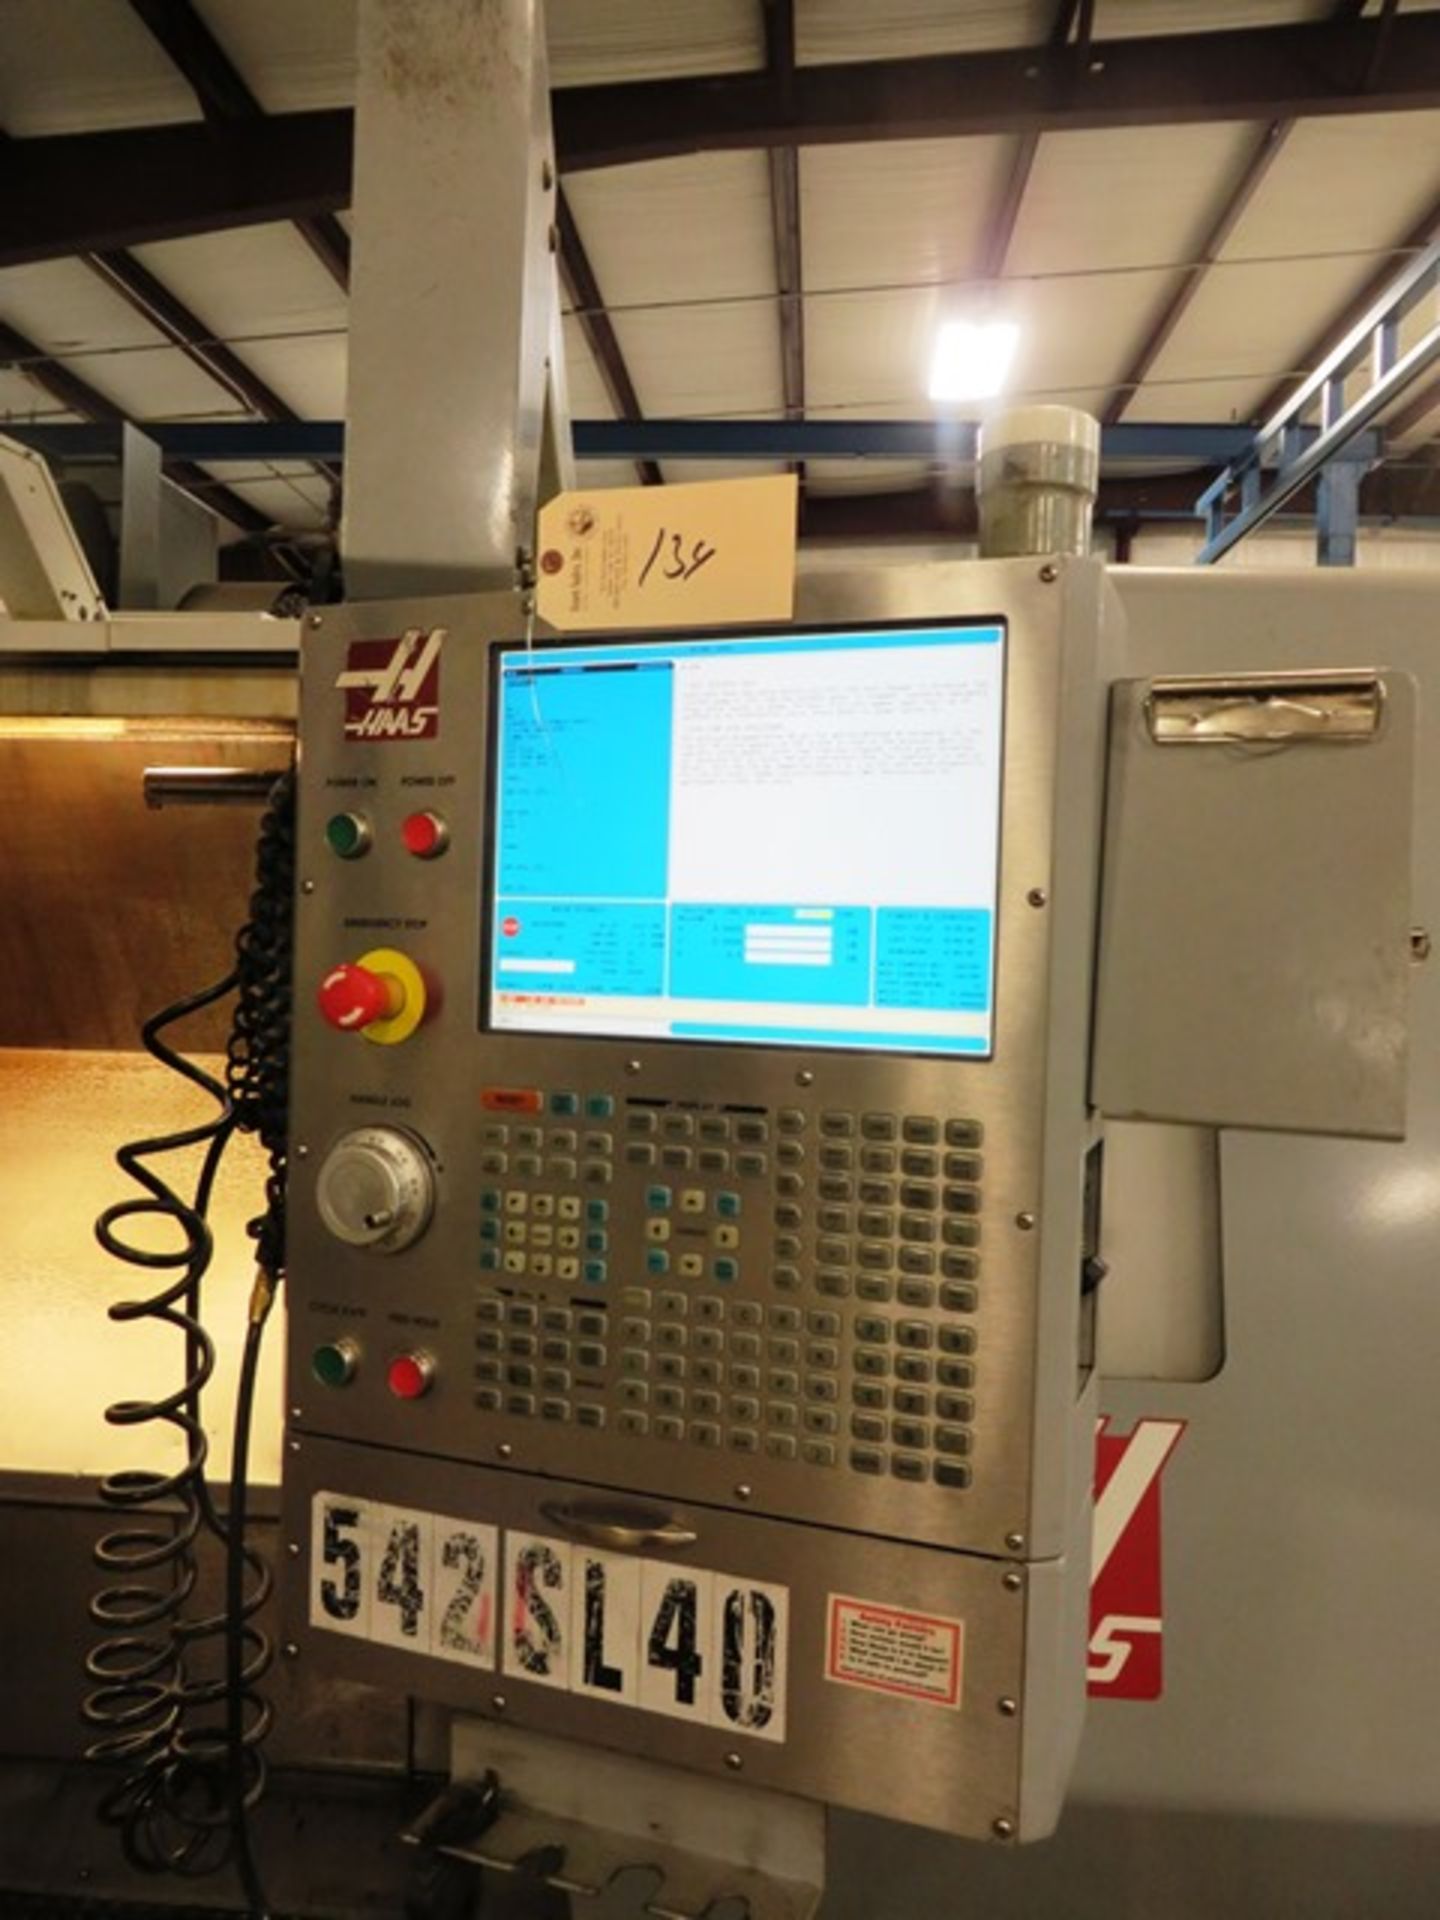 2008 Haas Model SL-40L CNC Turning Center - Image 2 of 6